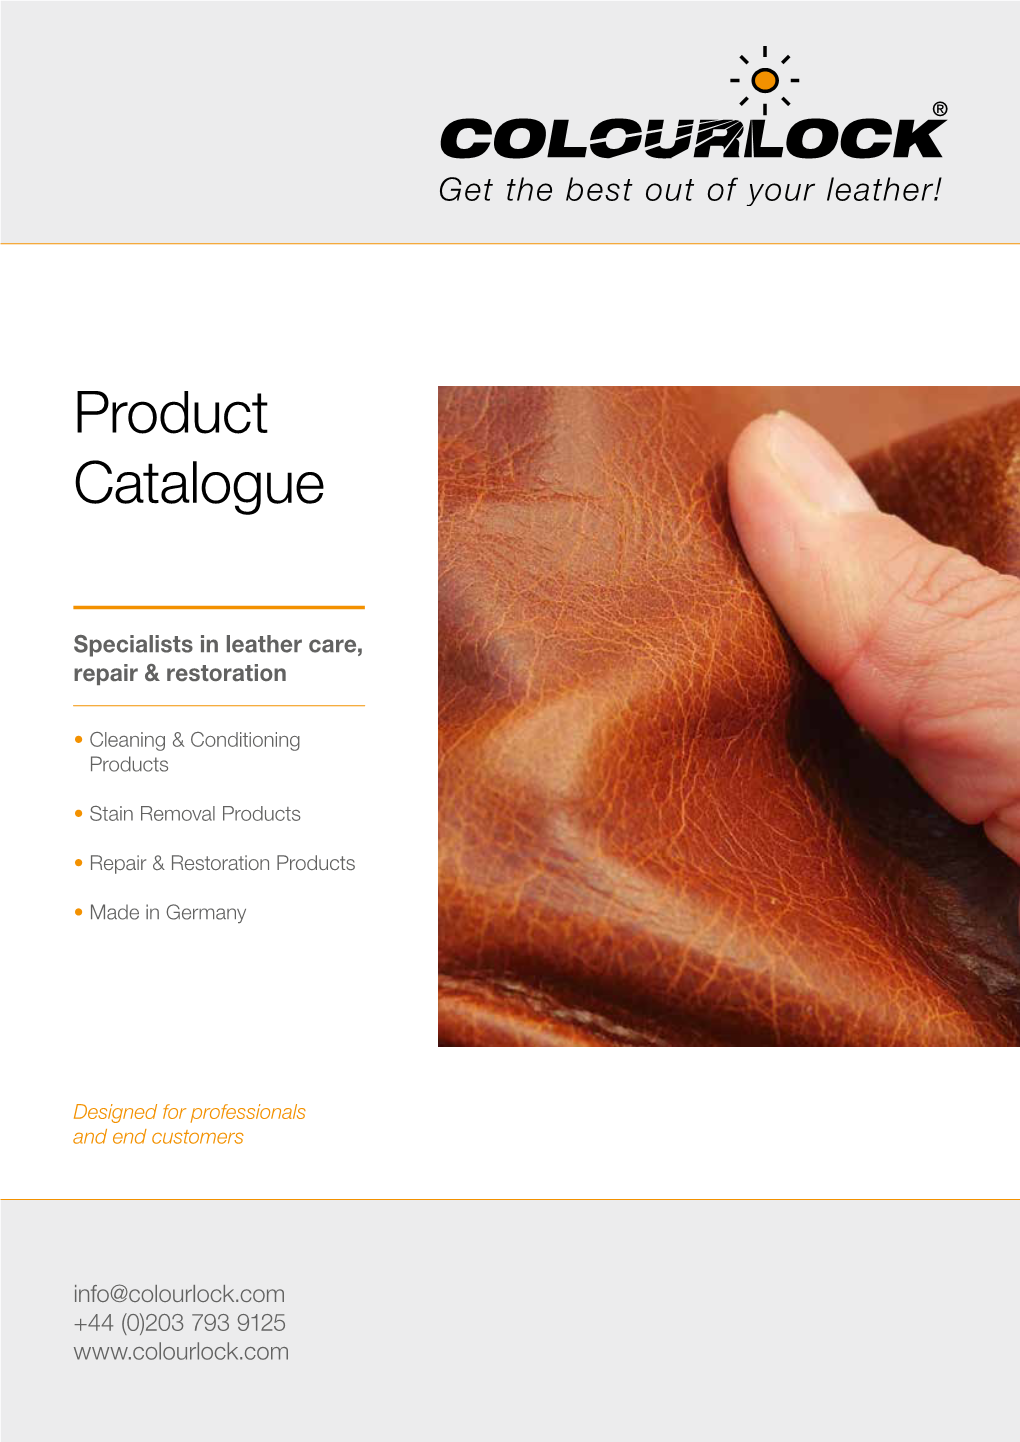 Download a Product Catalogue